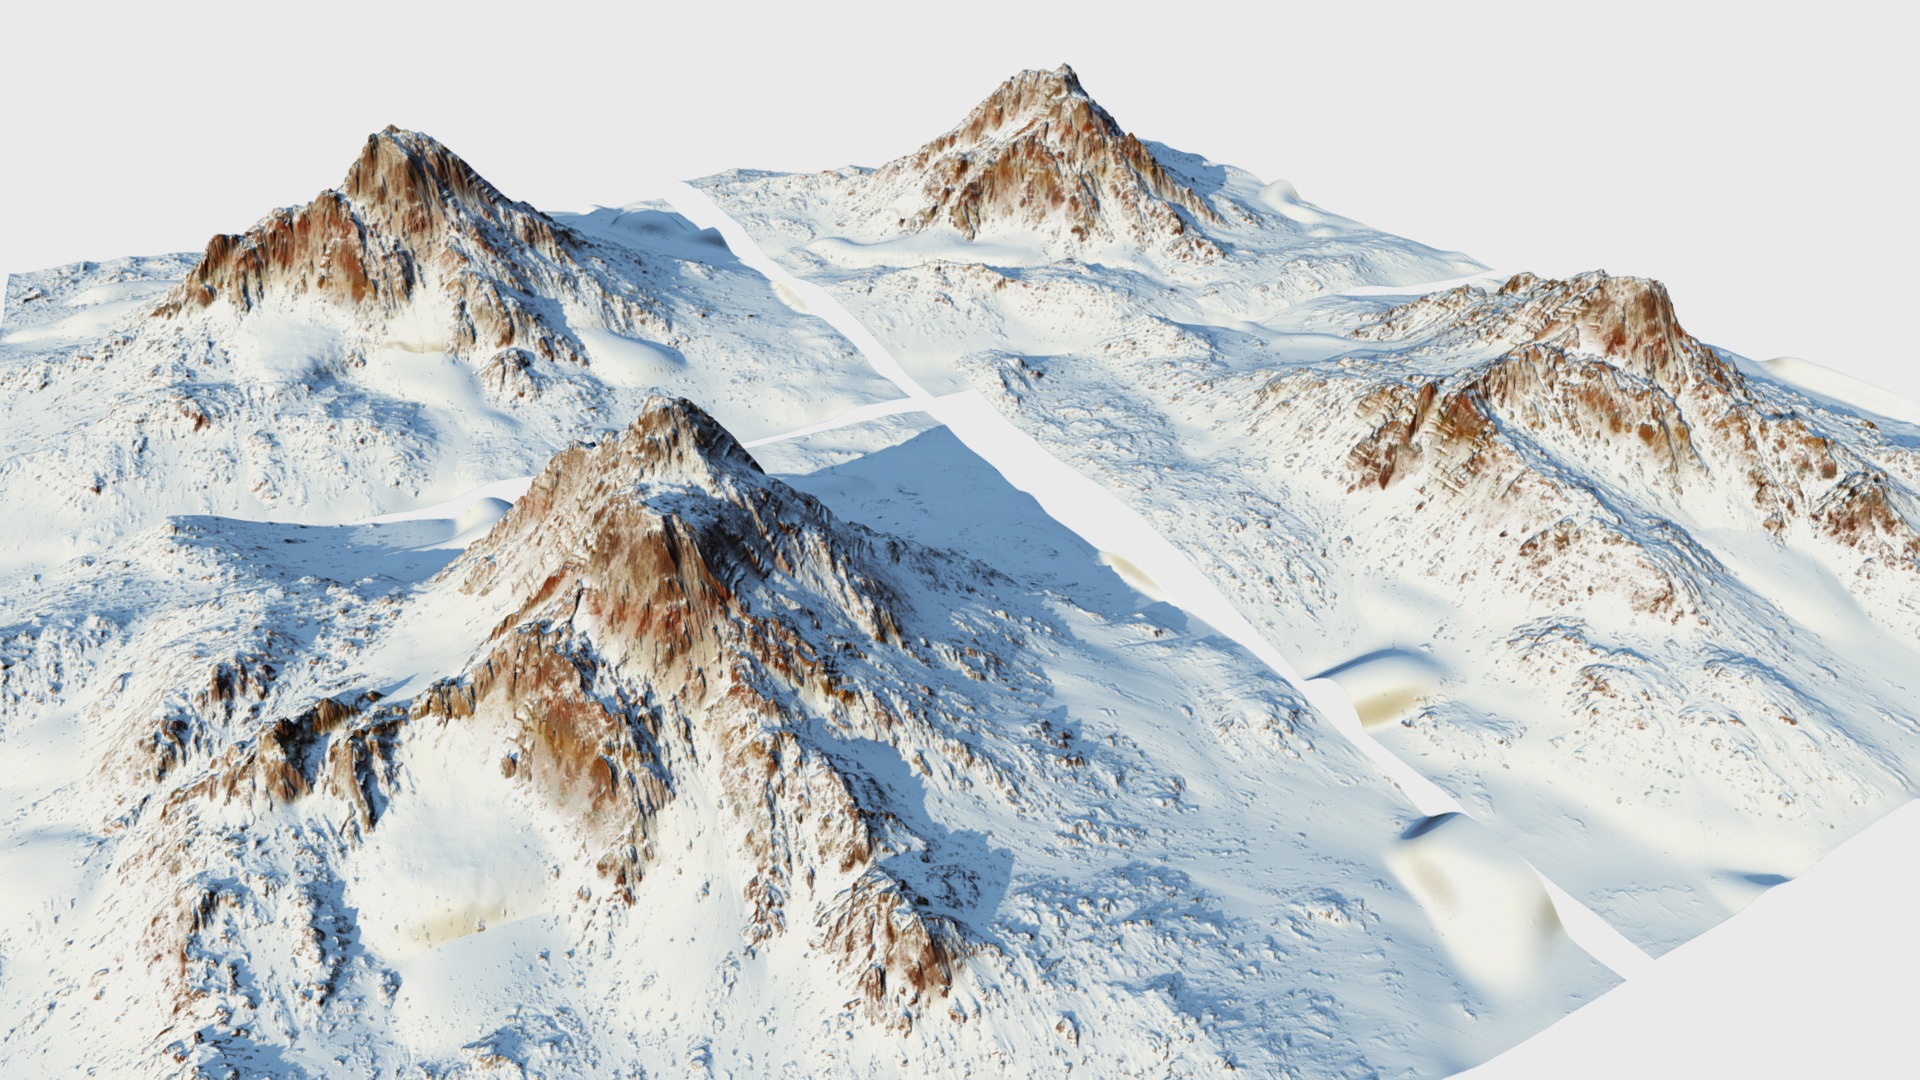 3D model Snow mountain Pack (World Machine) Type2 - This is a 3D model of the Snow mountain Pack (World Machine) Type2. The 3D model is about a snowy mountain with a few peaks.